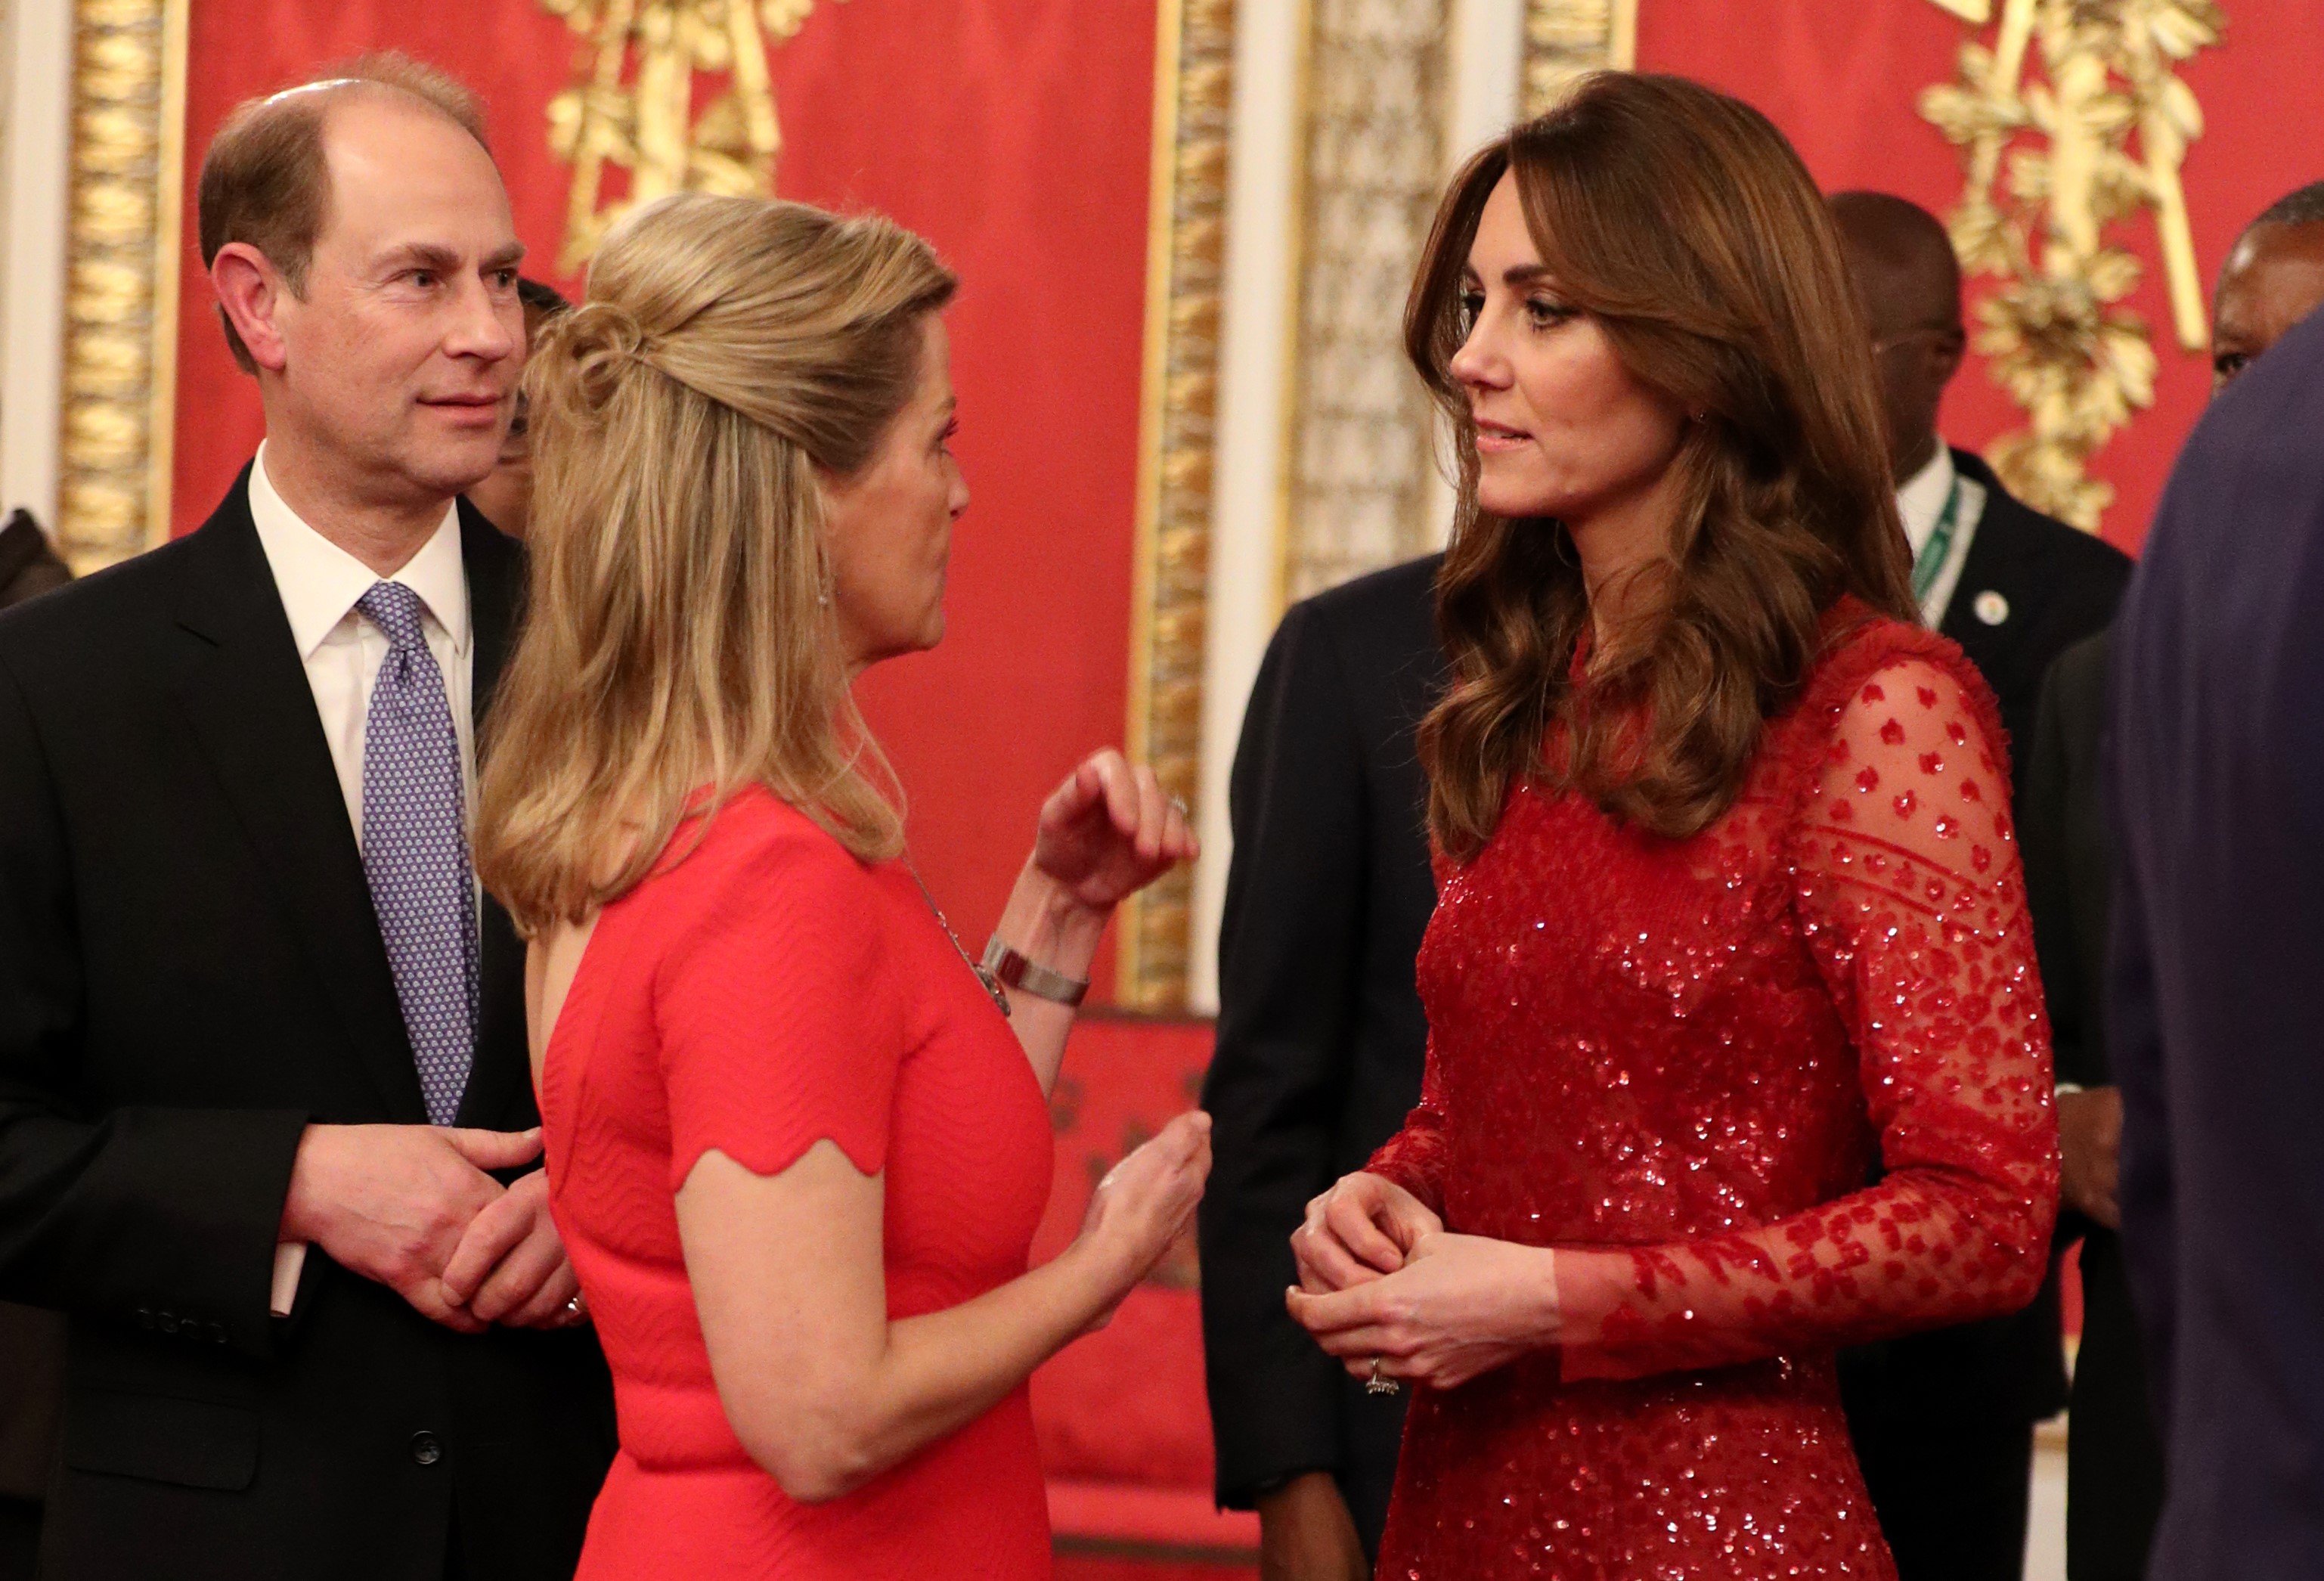 Prince Edward and his wife Sophie, Countess of Wessex speaking to Kate Middleton during reception at Buckingham Palace